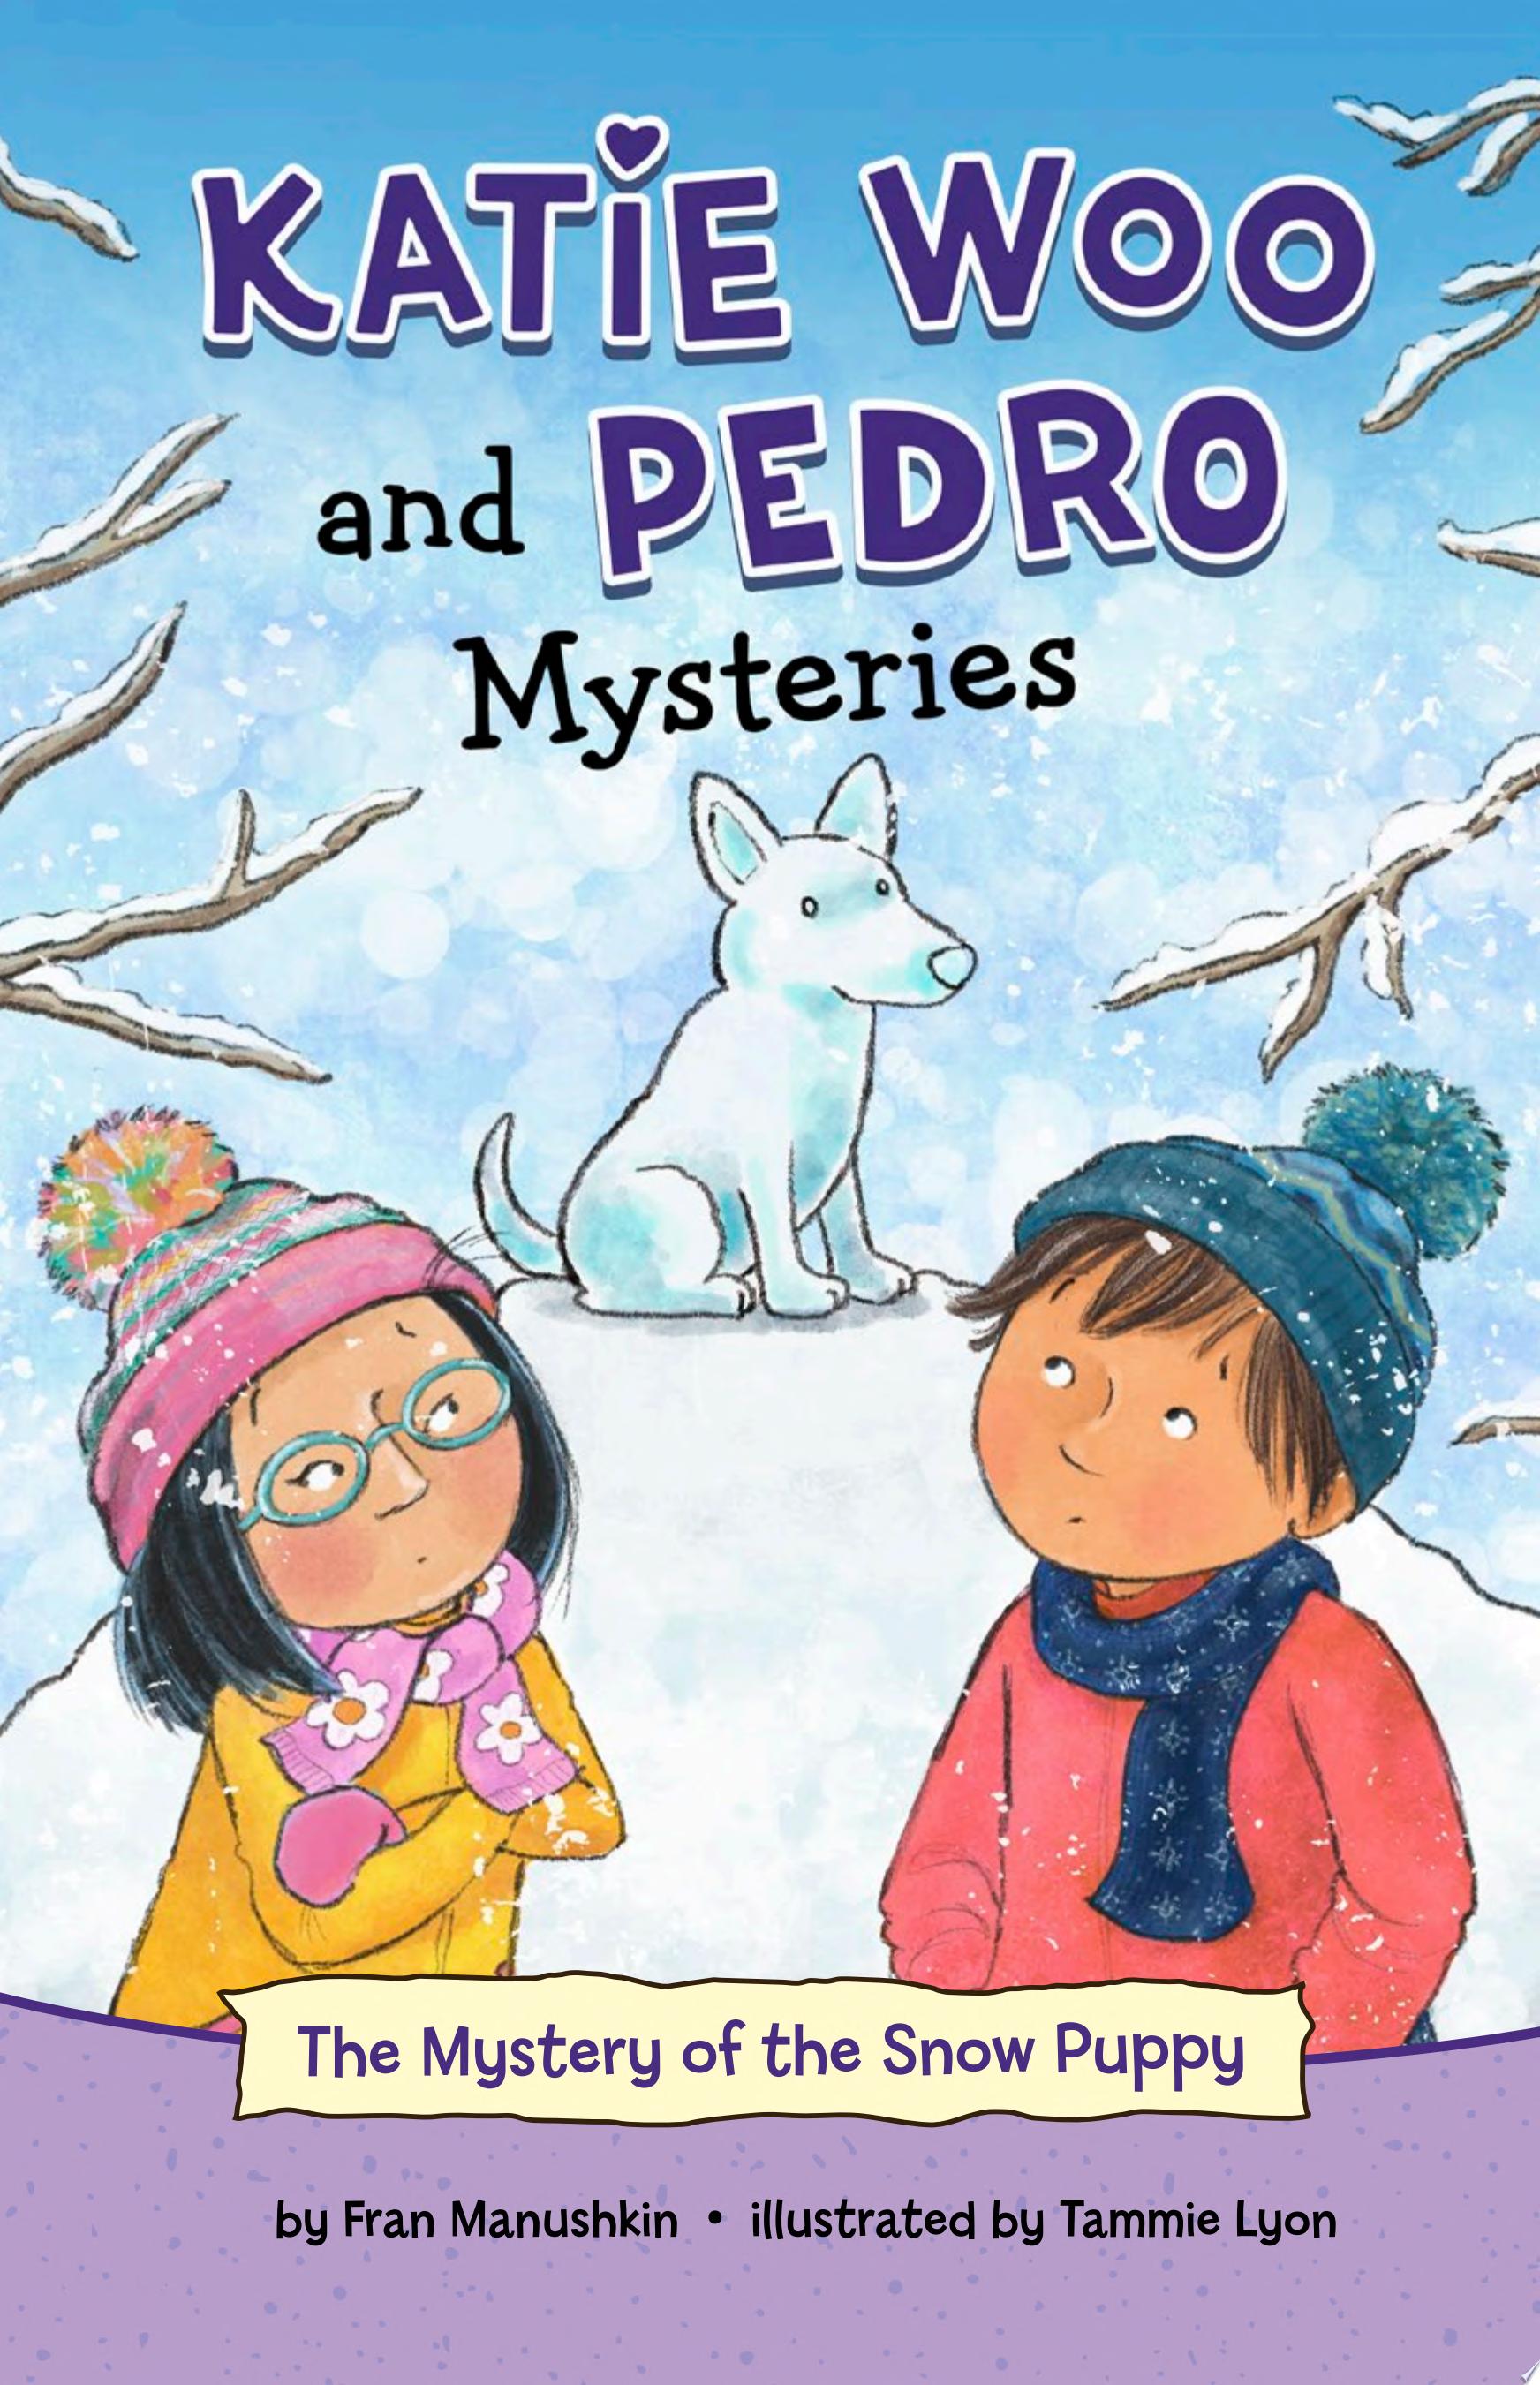 Image for "The Mystery of the Snow Puppy"